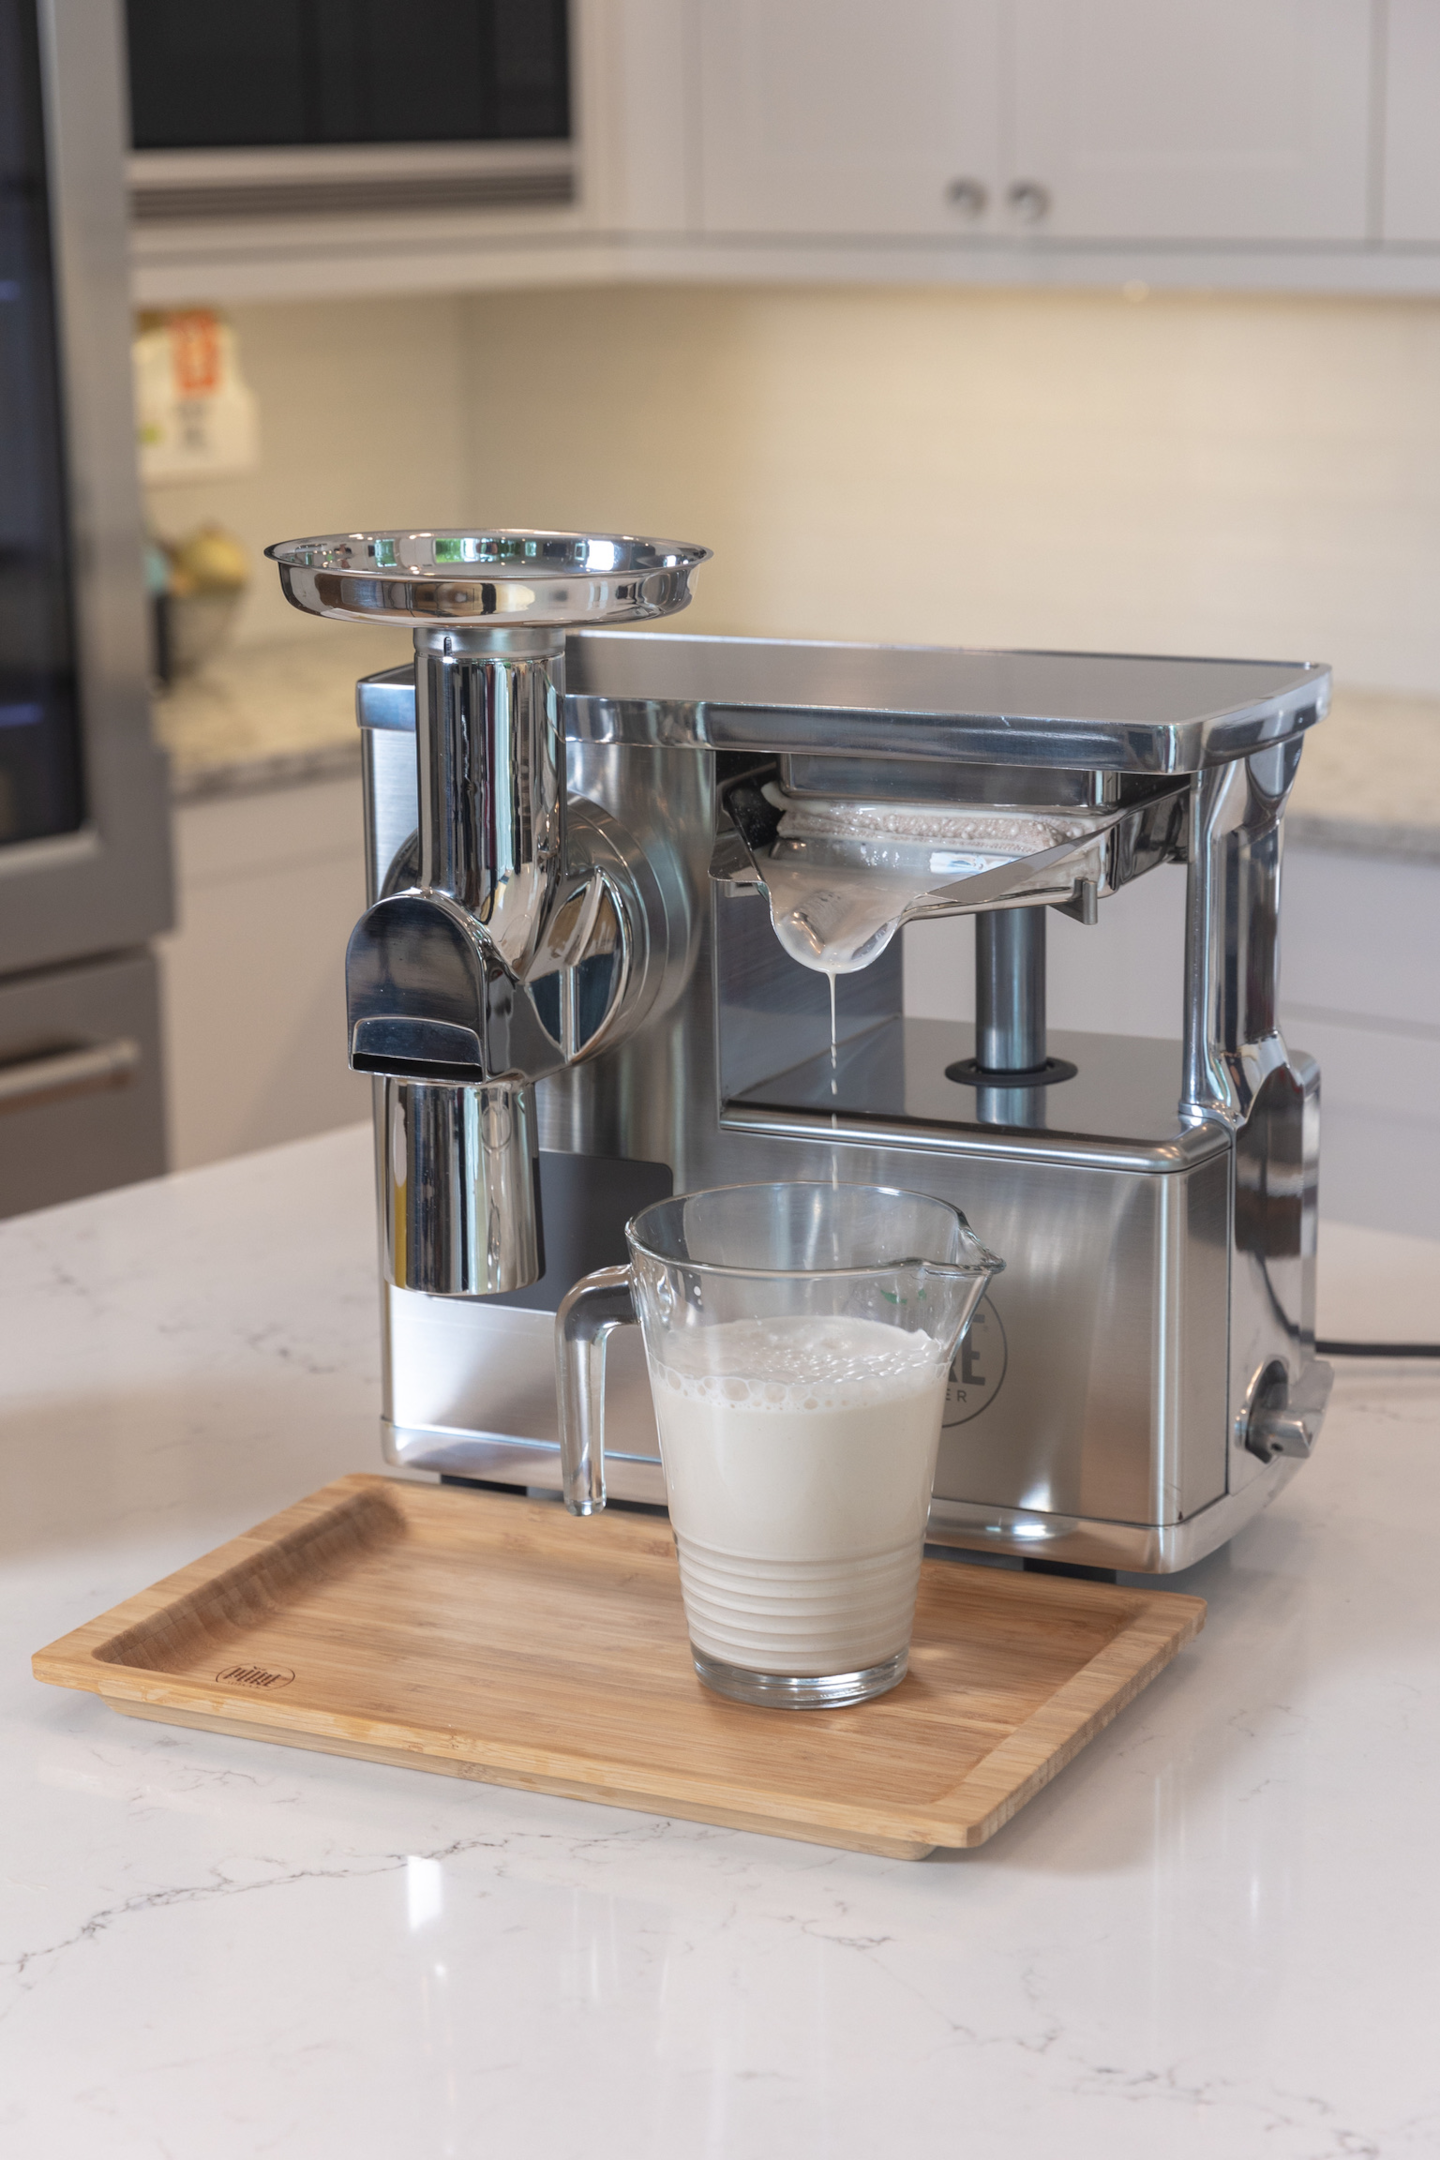 A glass pitched of homemade almond milk stands under the press of the PURE Juicer.